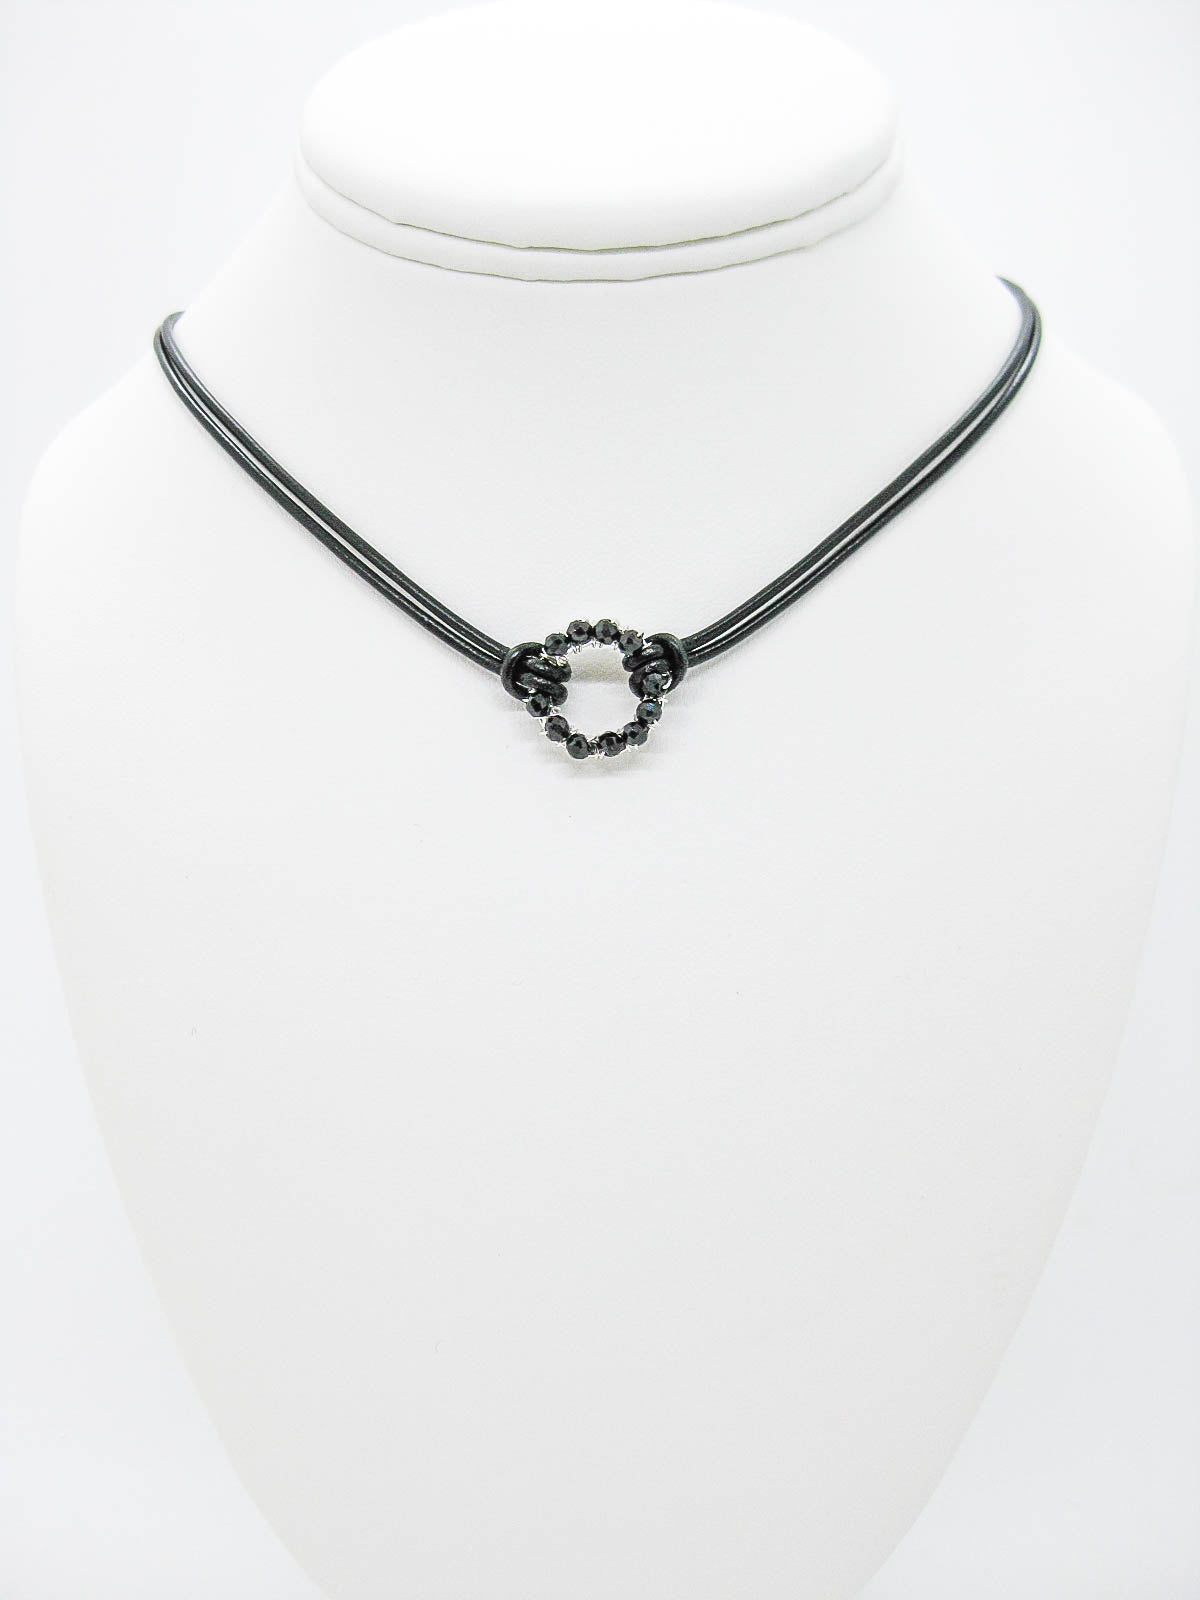 Circle: Black Spinel Leather Necklace - n461